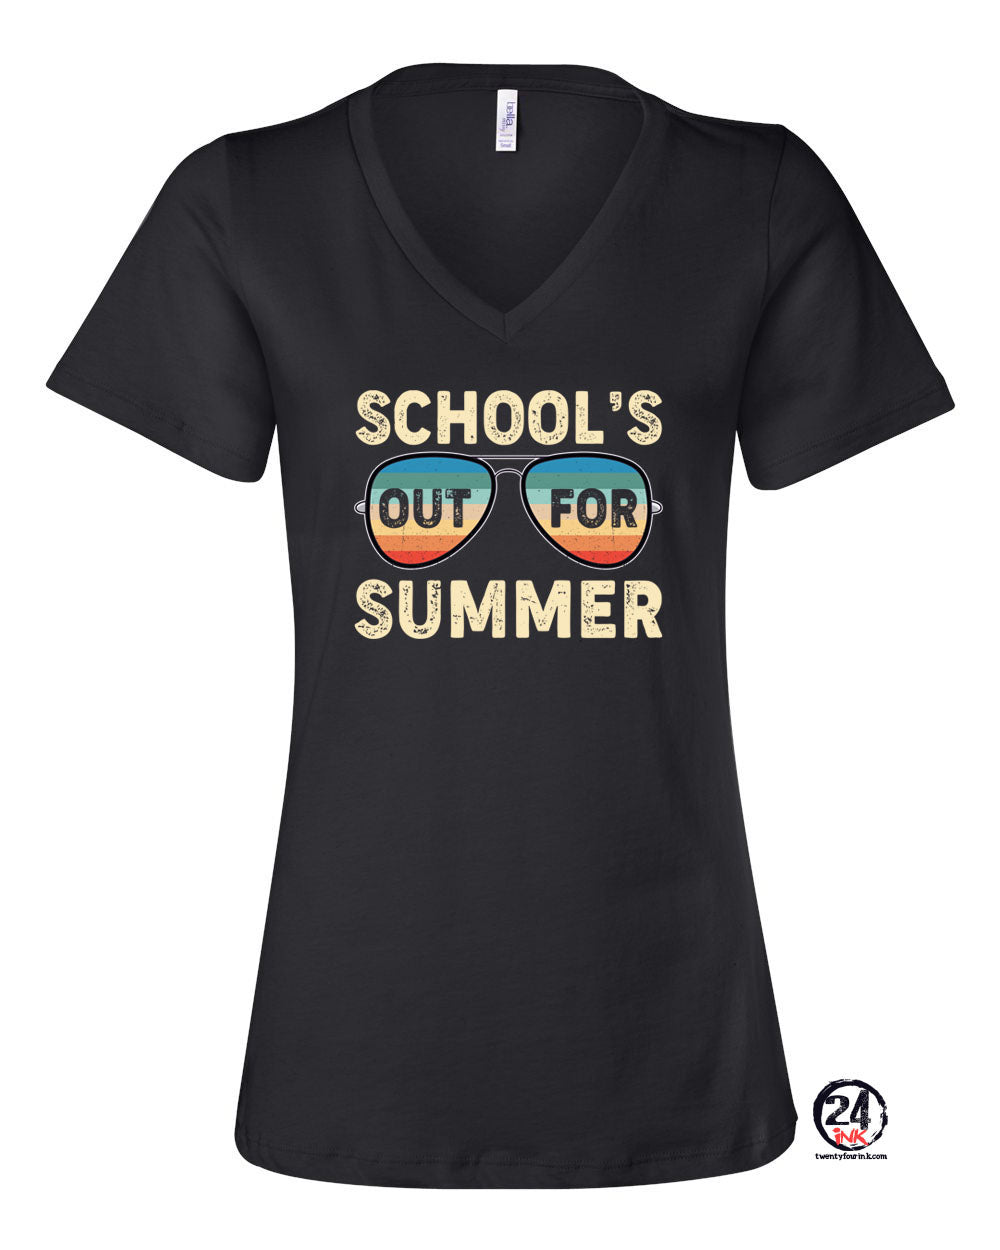 SchoolsOut Kids Club  Out of Hours Children's Care – SchoolsOut